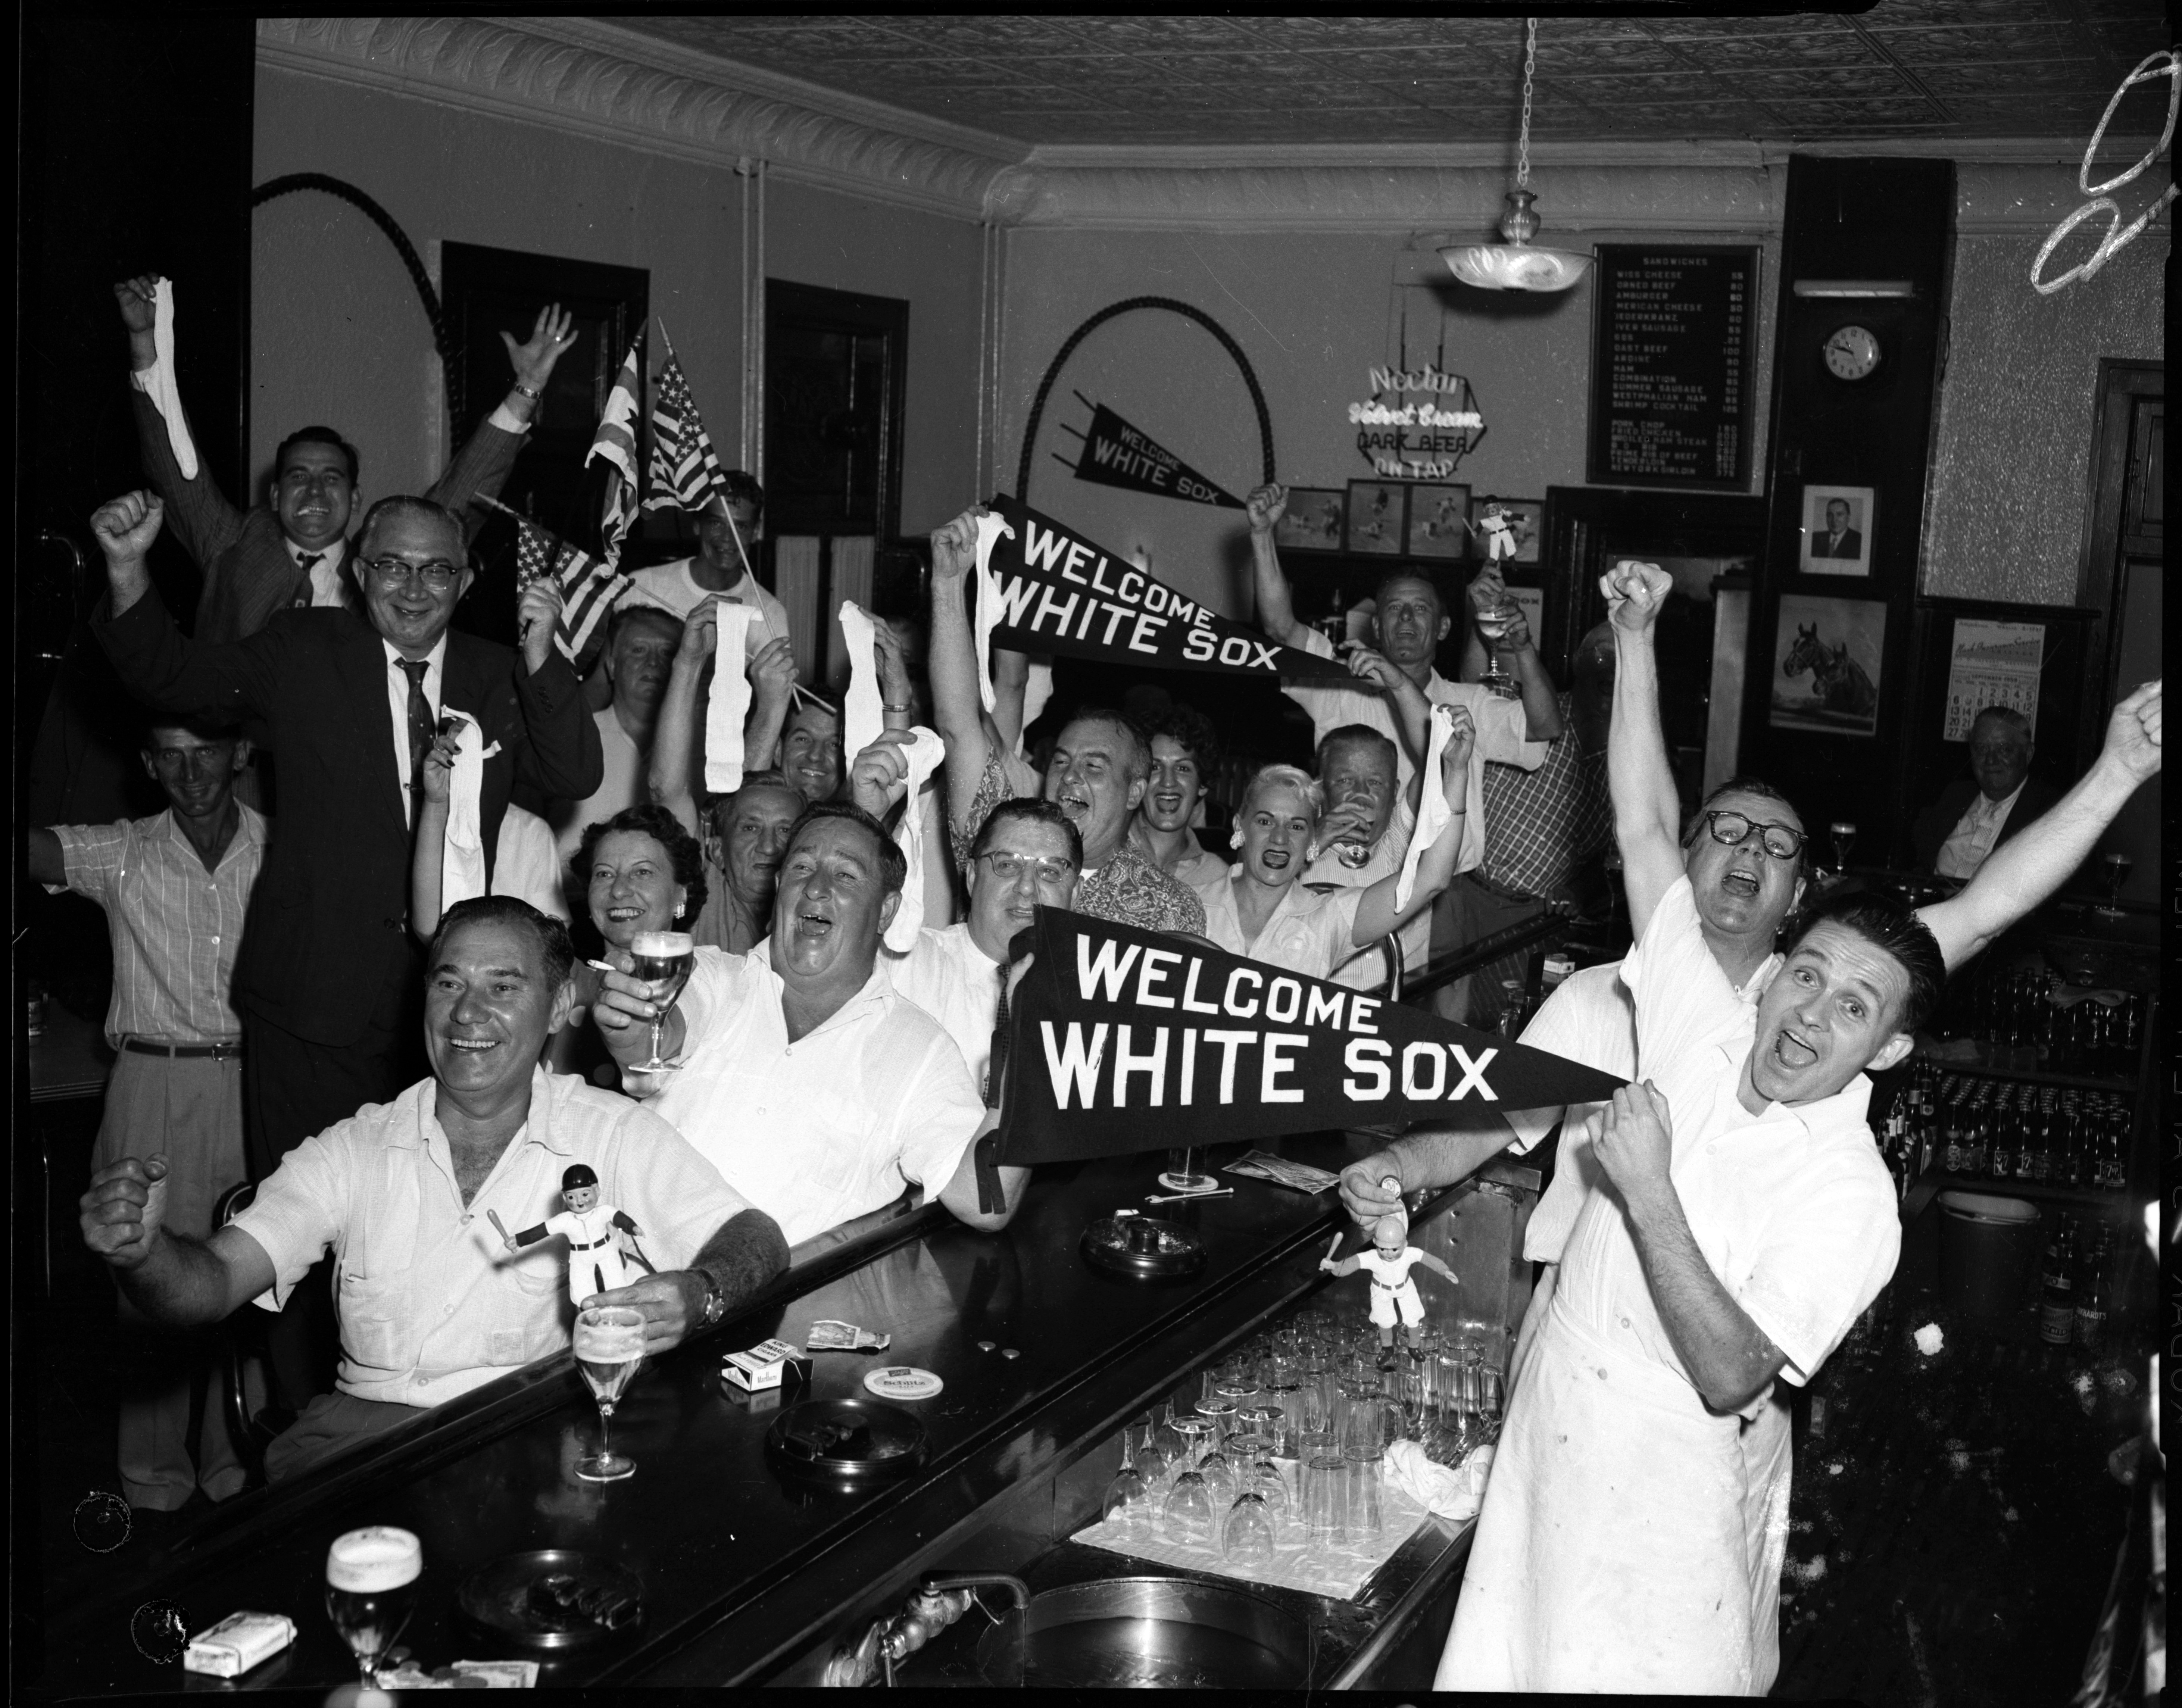 Comiskey Park's Last World Series' a trip back to 1959